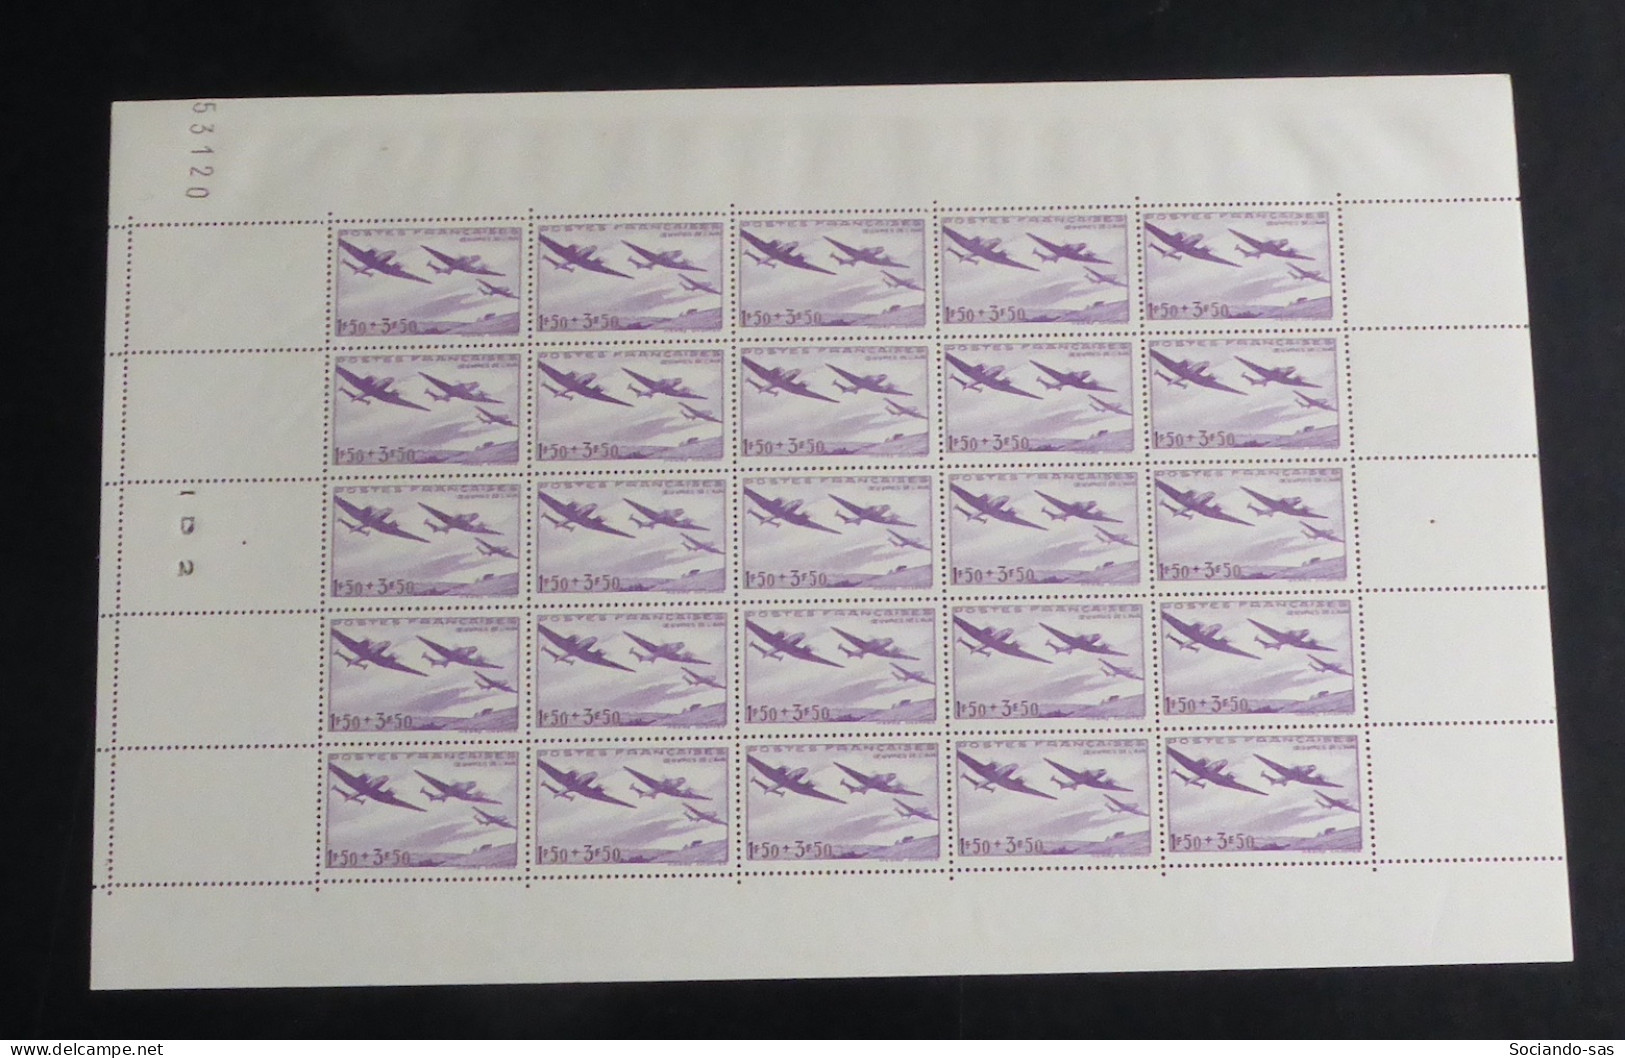 FRANCE - 1942 - N°YT. 540 - Oeuvres De L'air - Feuille Complète - Neuf Luxe ** / MNH / Postfrisch - Full Sheets